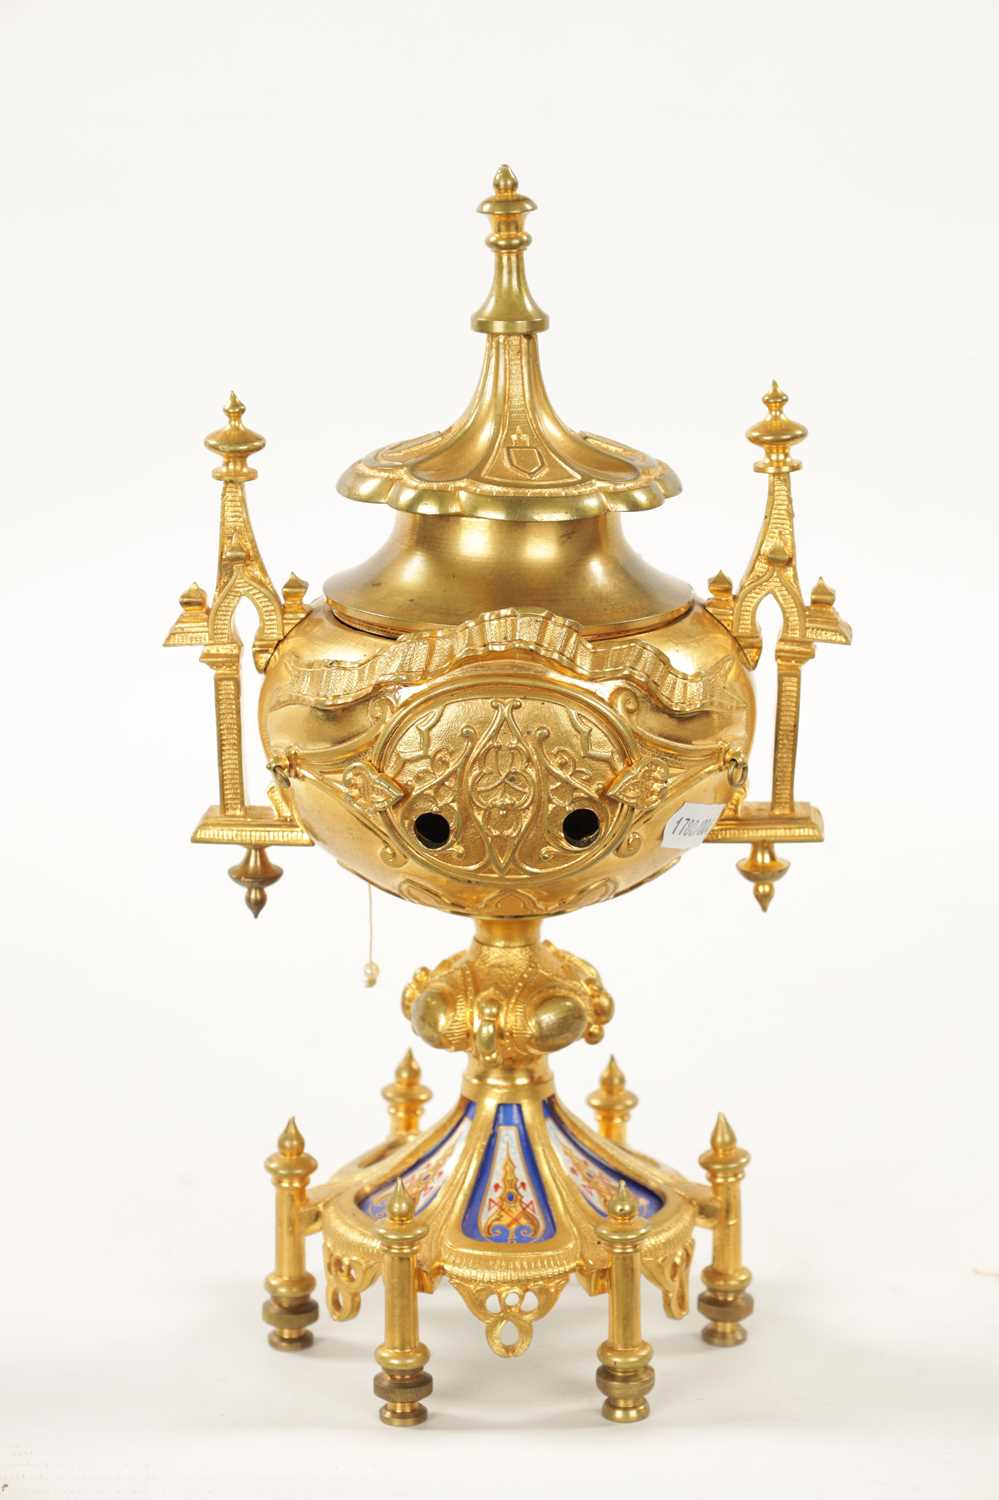 A LATE 19TH CENTURY FRENCH ORMOLU AND PORCELAIN PANELLED MANTEL CLOCK - Image 7 of 9